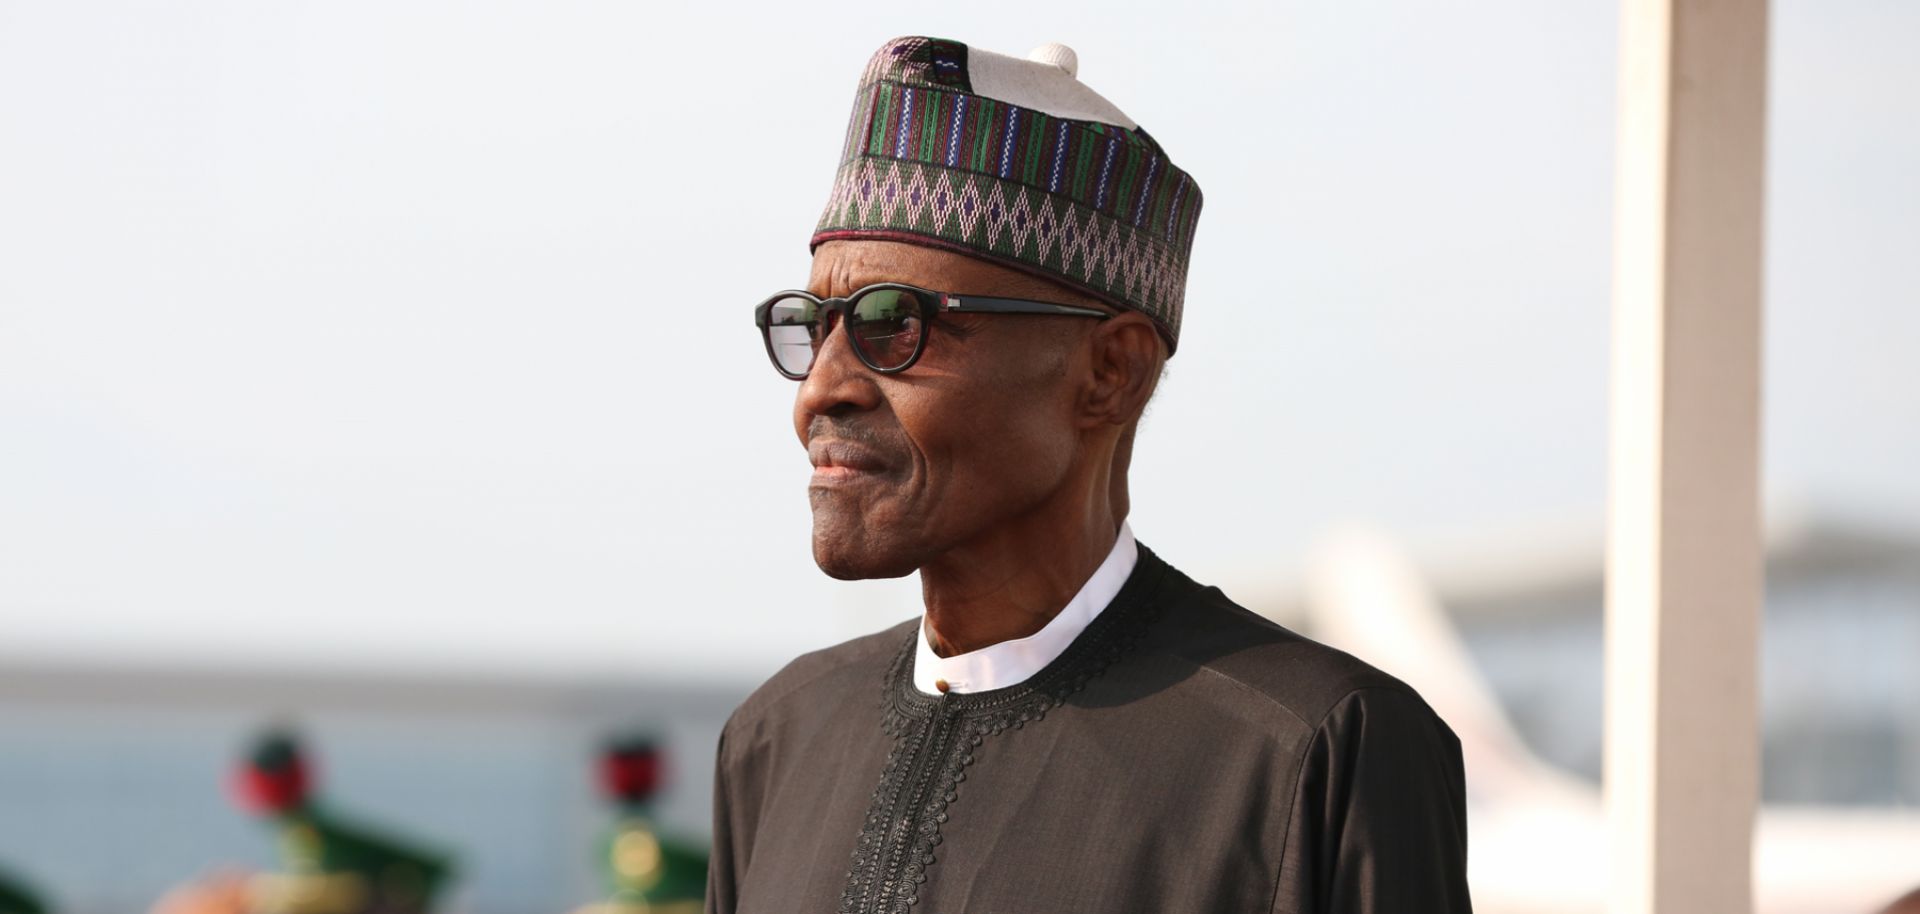 Nigerian President Muhammadu Buhari arrived back in Abuja on Aug. 19 after a three-month medical leave.